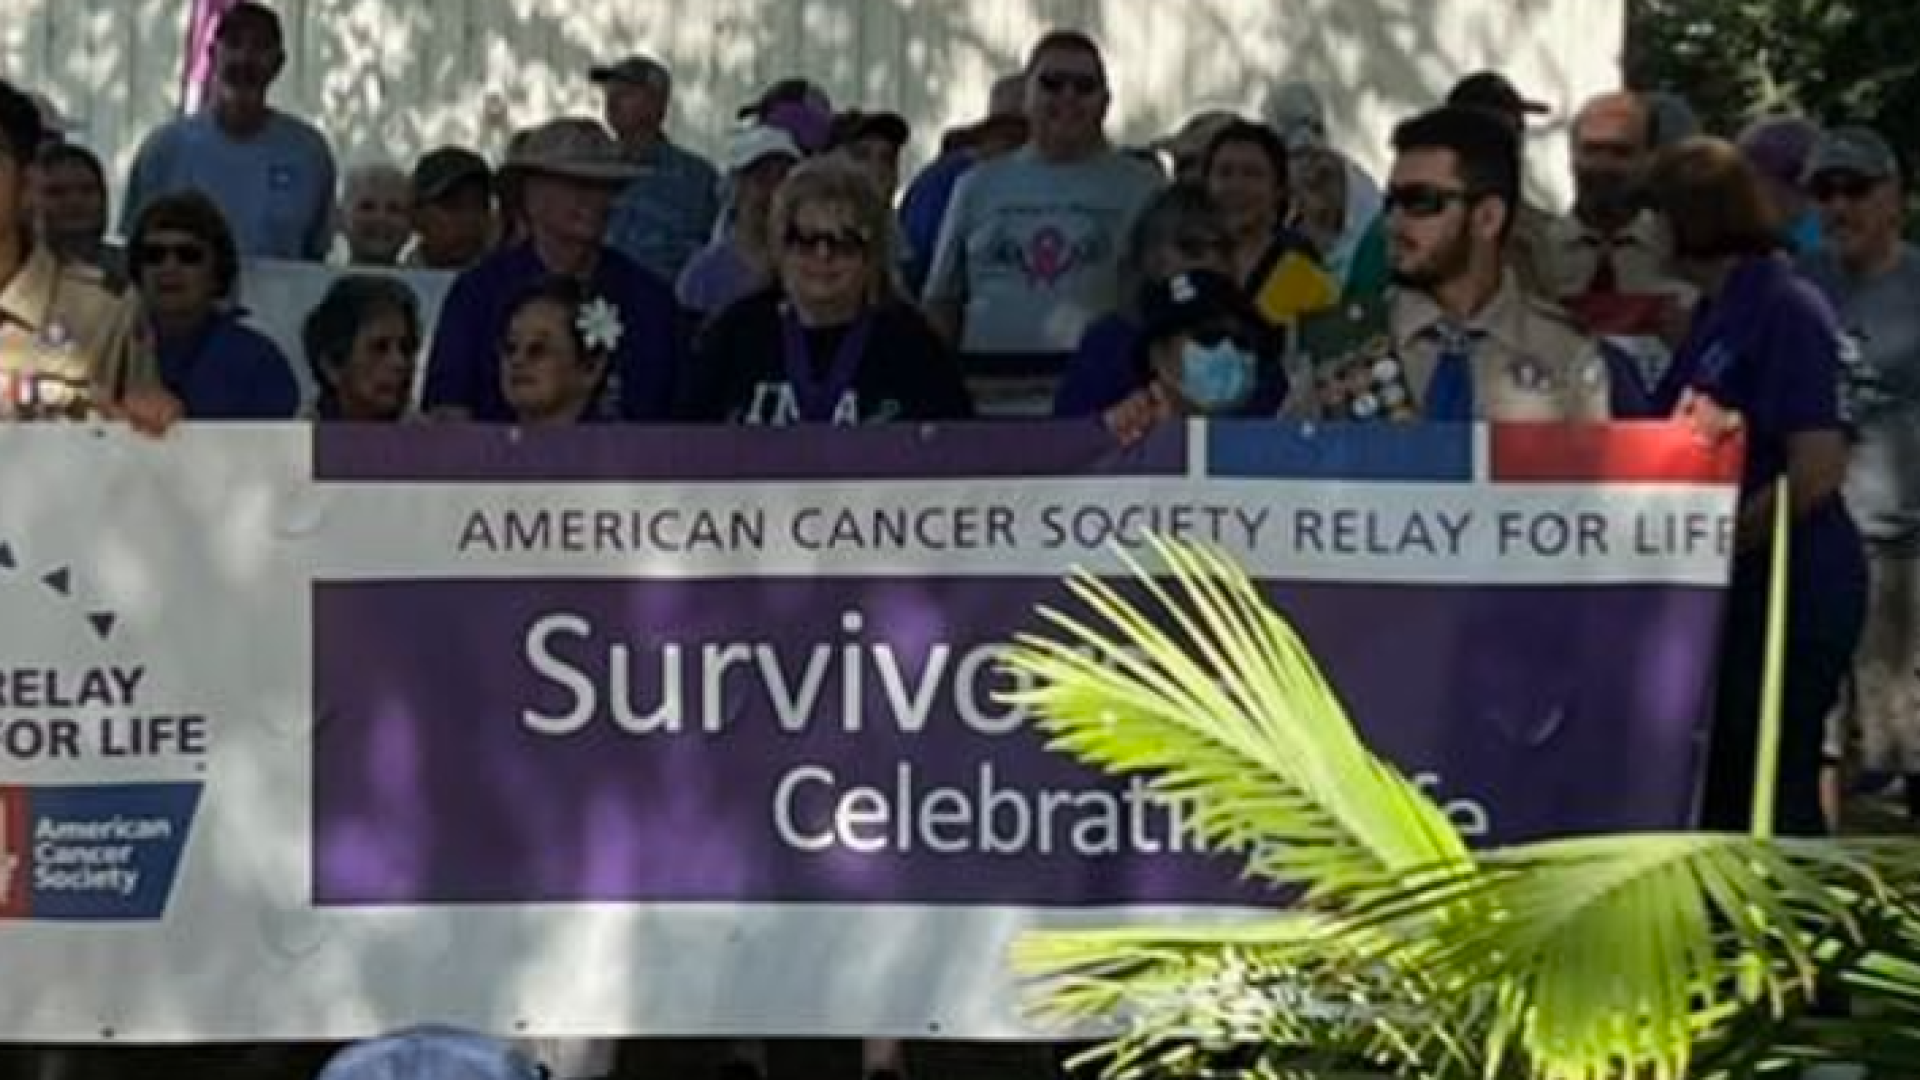 Banner for Relay for Life held  IN front of participants 2022